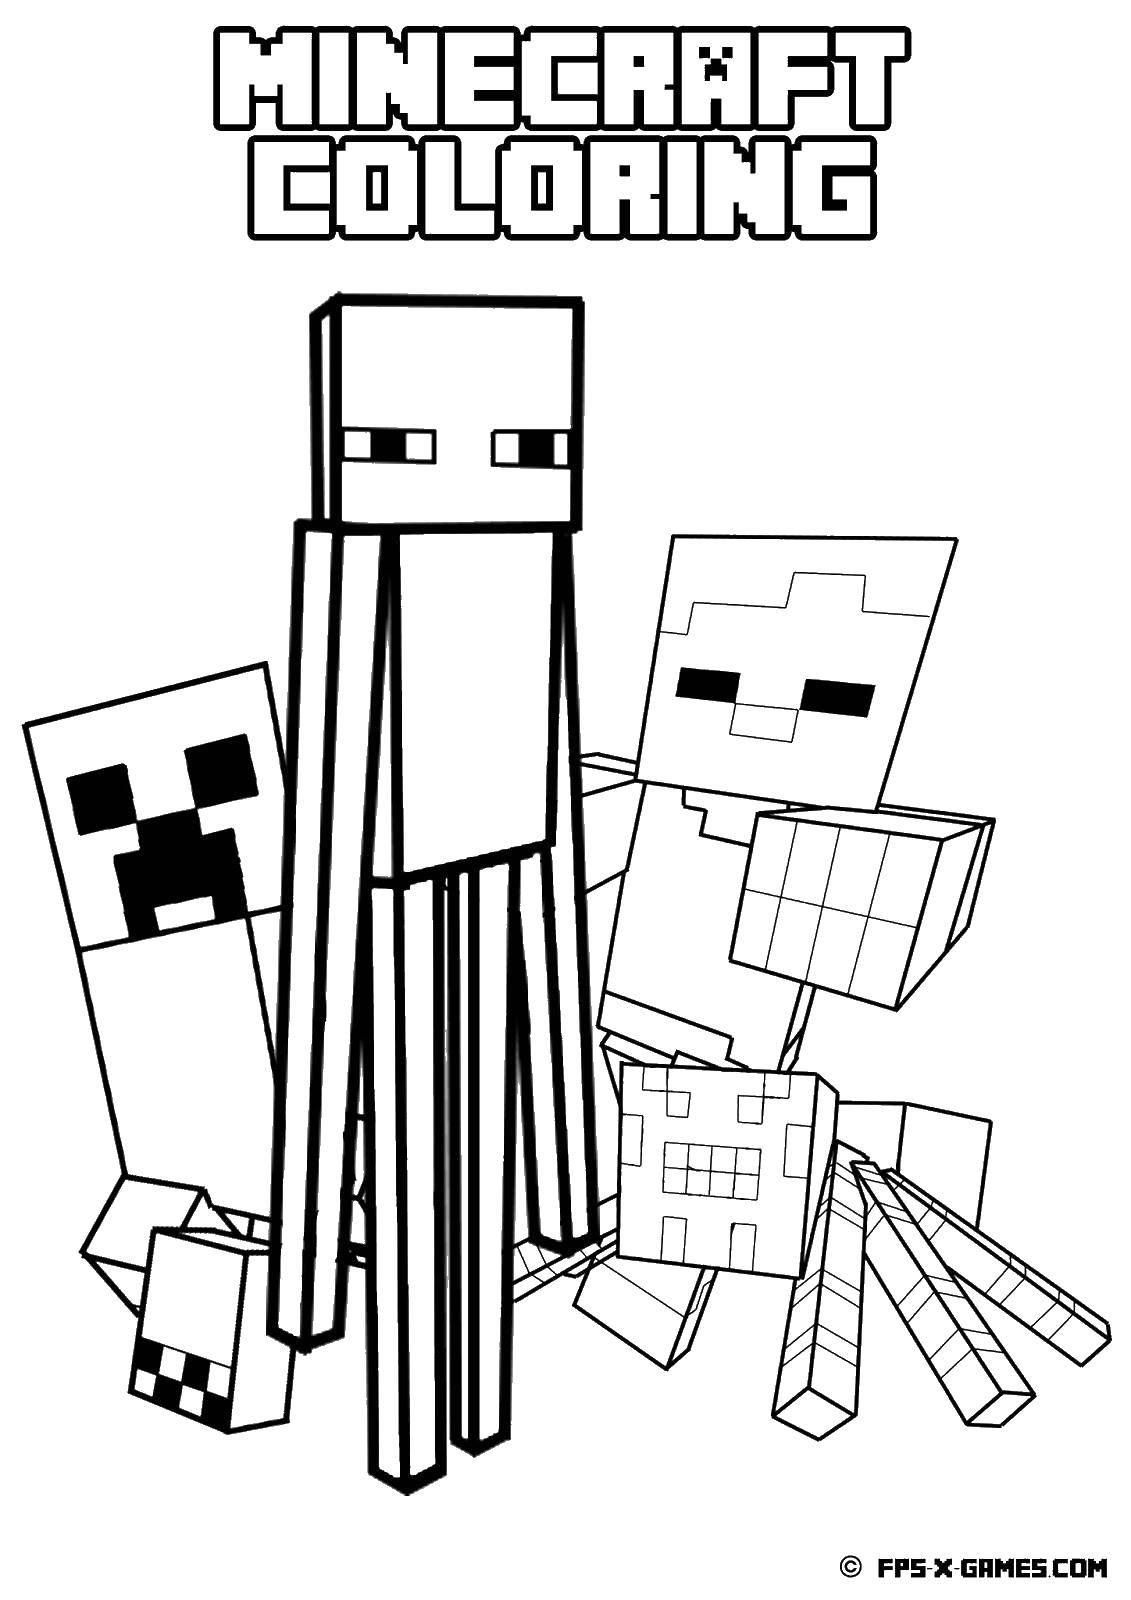 Coloring Coloring minecraft. Category The mainkrafta. Tags:  mincraft, games, coloring pages.